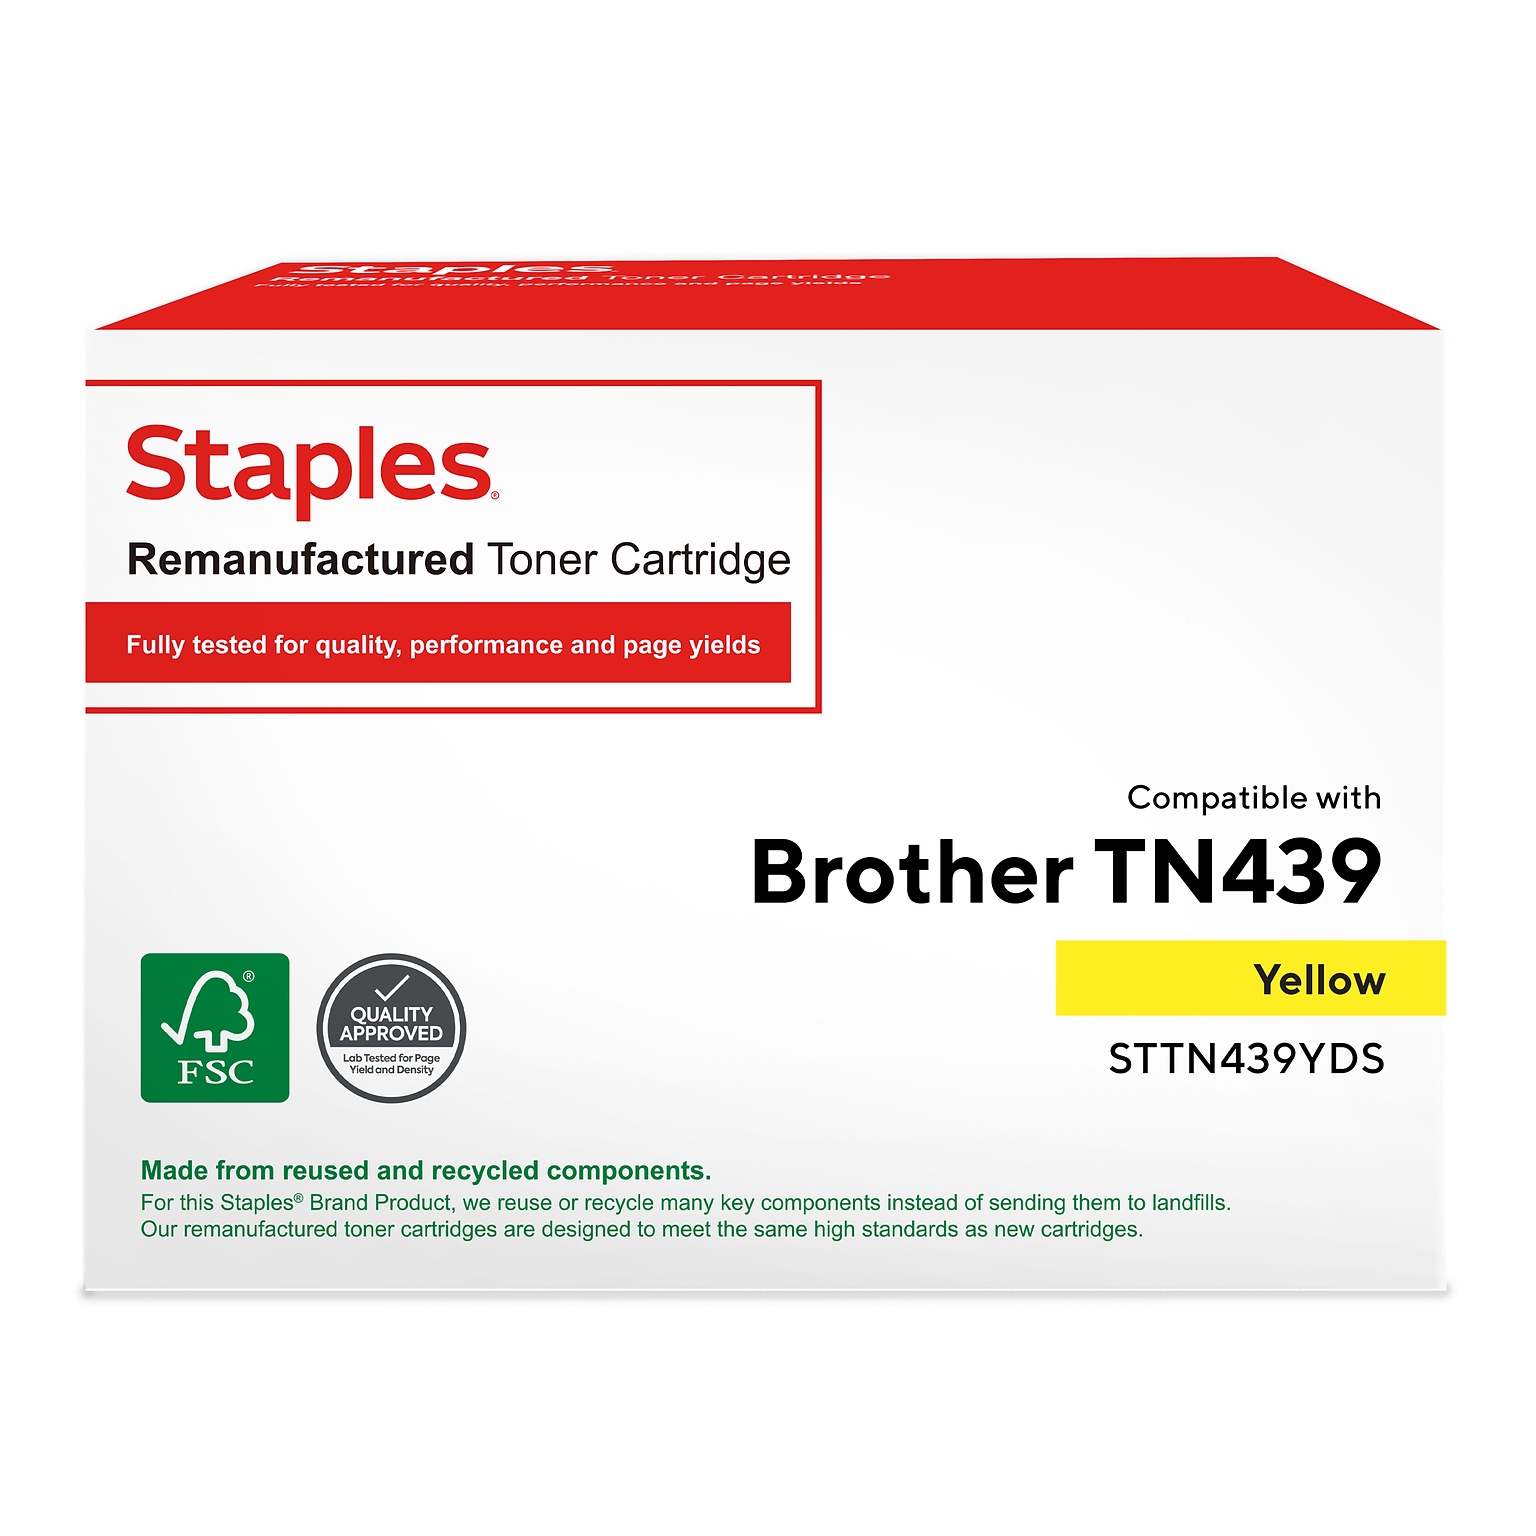 Staples Remanufactured Yellow Ultra High Yield Toner Cartridge Replacement for Brother TN439 (TRTN439YDS/STTN439YDS)